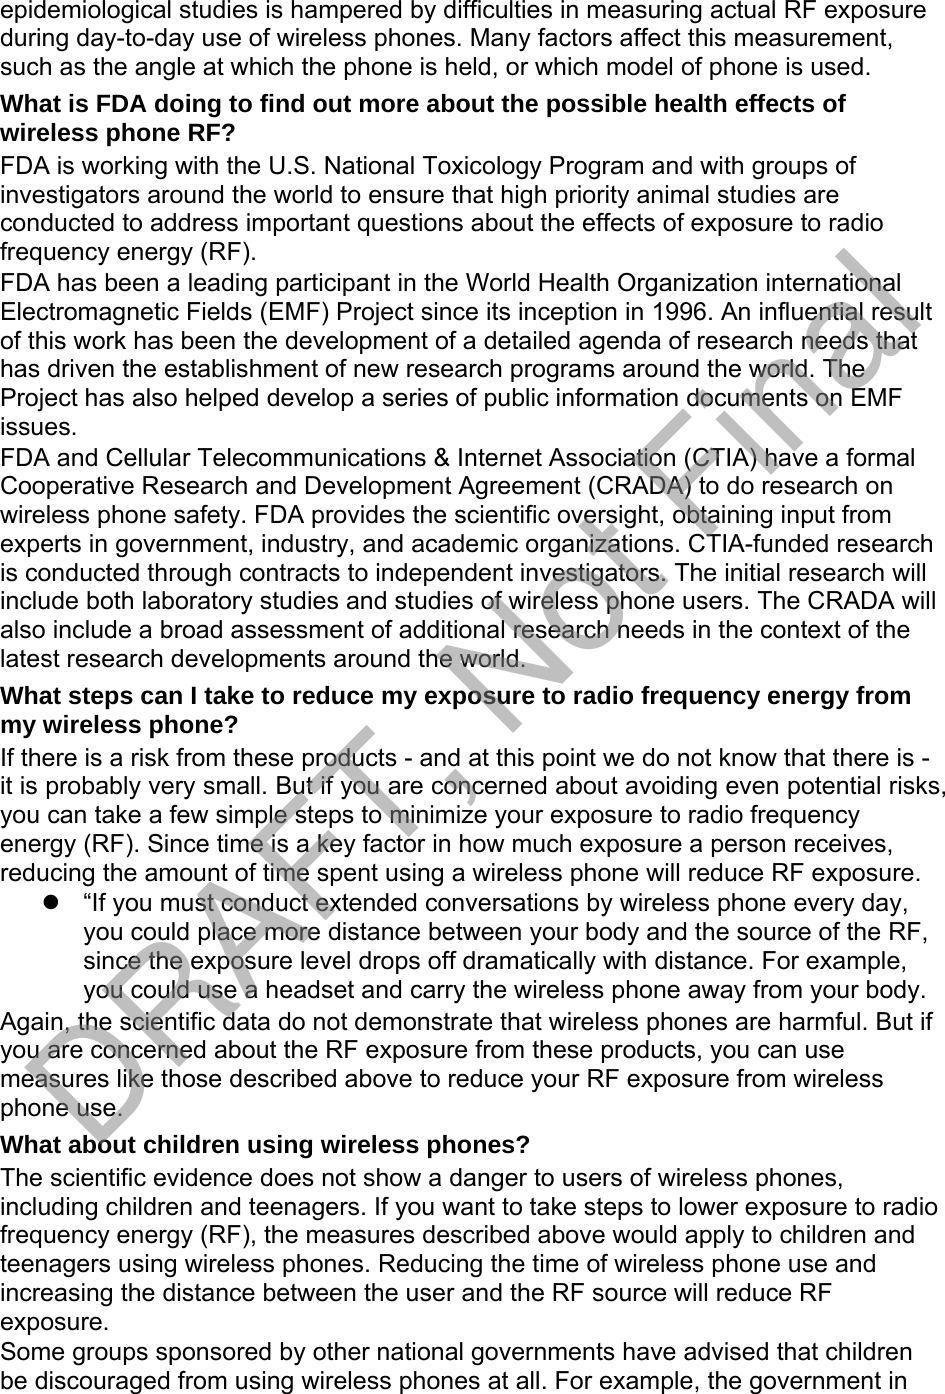 epidemiological studies is hampered by difficulties in measuring actual RF exposure during day-to-day use of wireless phones. Many factors affect this measurement, such as the angle at which the phone is held, or which model of phone is used. What is FDA doing to find out more about the possible health effects of wireless phone RF? FDA is working with the U.S. National Toxicology Program and with groups of investigators around the world to ensure that high priority animal studies are conducted to address important questions about the effects of exposure to radio frequency energy (RF). FDA has been a leading participant in the World Health Organization international Electromagnetic Fields (EMF) Project since its inception in 1996. An influential result of this work has been the development of a detailed agenda of research needs that has driven the establishment of new research programs around the world. The Project has also helped develop a series of public information documents on EMF issues. FDA and Cellular Telecommunications &amp; Internet Association (CTIA) have a formal Cooperative Research and Development Agreement (CRADA) to do research on wireless phone safety. FDA provides the scientific oversight, obtaining input from experts in government, industry, and academic organizations. CTIA-funded research is conducted through contracts to independent investigators. The initial research will include both laboratory studies and studies of wireless phone users. The CRADA will also include a broad assessment of additional research needs in the context of the latest research developments around the world. What steps can I take to reduce my exposure to radio frequency energy from my wireless phone? If there is a risk from these products - and at this point we do not know that there is - it is probably very small. But if you are concerned about avoiding even potential risks, you can take a few simple steps to minimize your exposure to radio frequency energy (RF). Since time is a key factor in how much exposure a person receives, reducing the amount of time spent using a wireless phone will reduce RF exposure. “If you must conduct extended conversations by wireless phone every day,you could place more distance between your body and the source of the RF,since the exposure level drops off dramatically with distance. For example,you could use a headset and carry the wireless phone away from your body.Again, the scientific data do not demonstrate that wireless phones are harmful. But if you are concerned about the RF exposure from these products, you can use measures like those described above to reduce your RF exposure from wireless phone use. What about children using wireless phones? The scientific evidence does not show a danger to users of wireless phones, including children and teenagers. If you want to take steps to lower exposure to radio frequency energy (RF), the measures described above would apply to children and teenagers using wireless phones. Reducing the time of wireless phone use and increasing the distance between the user and the RF source will reduce RF exposure. Some groups sponsored by other national governments have advised that children be discouraged from using wireless phones at all. For example, the government in DRAFT, Not Final